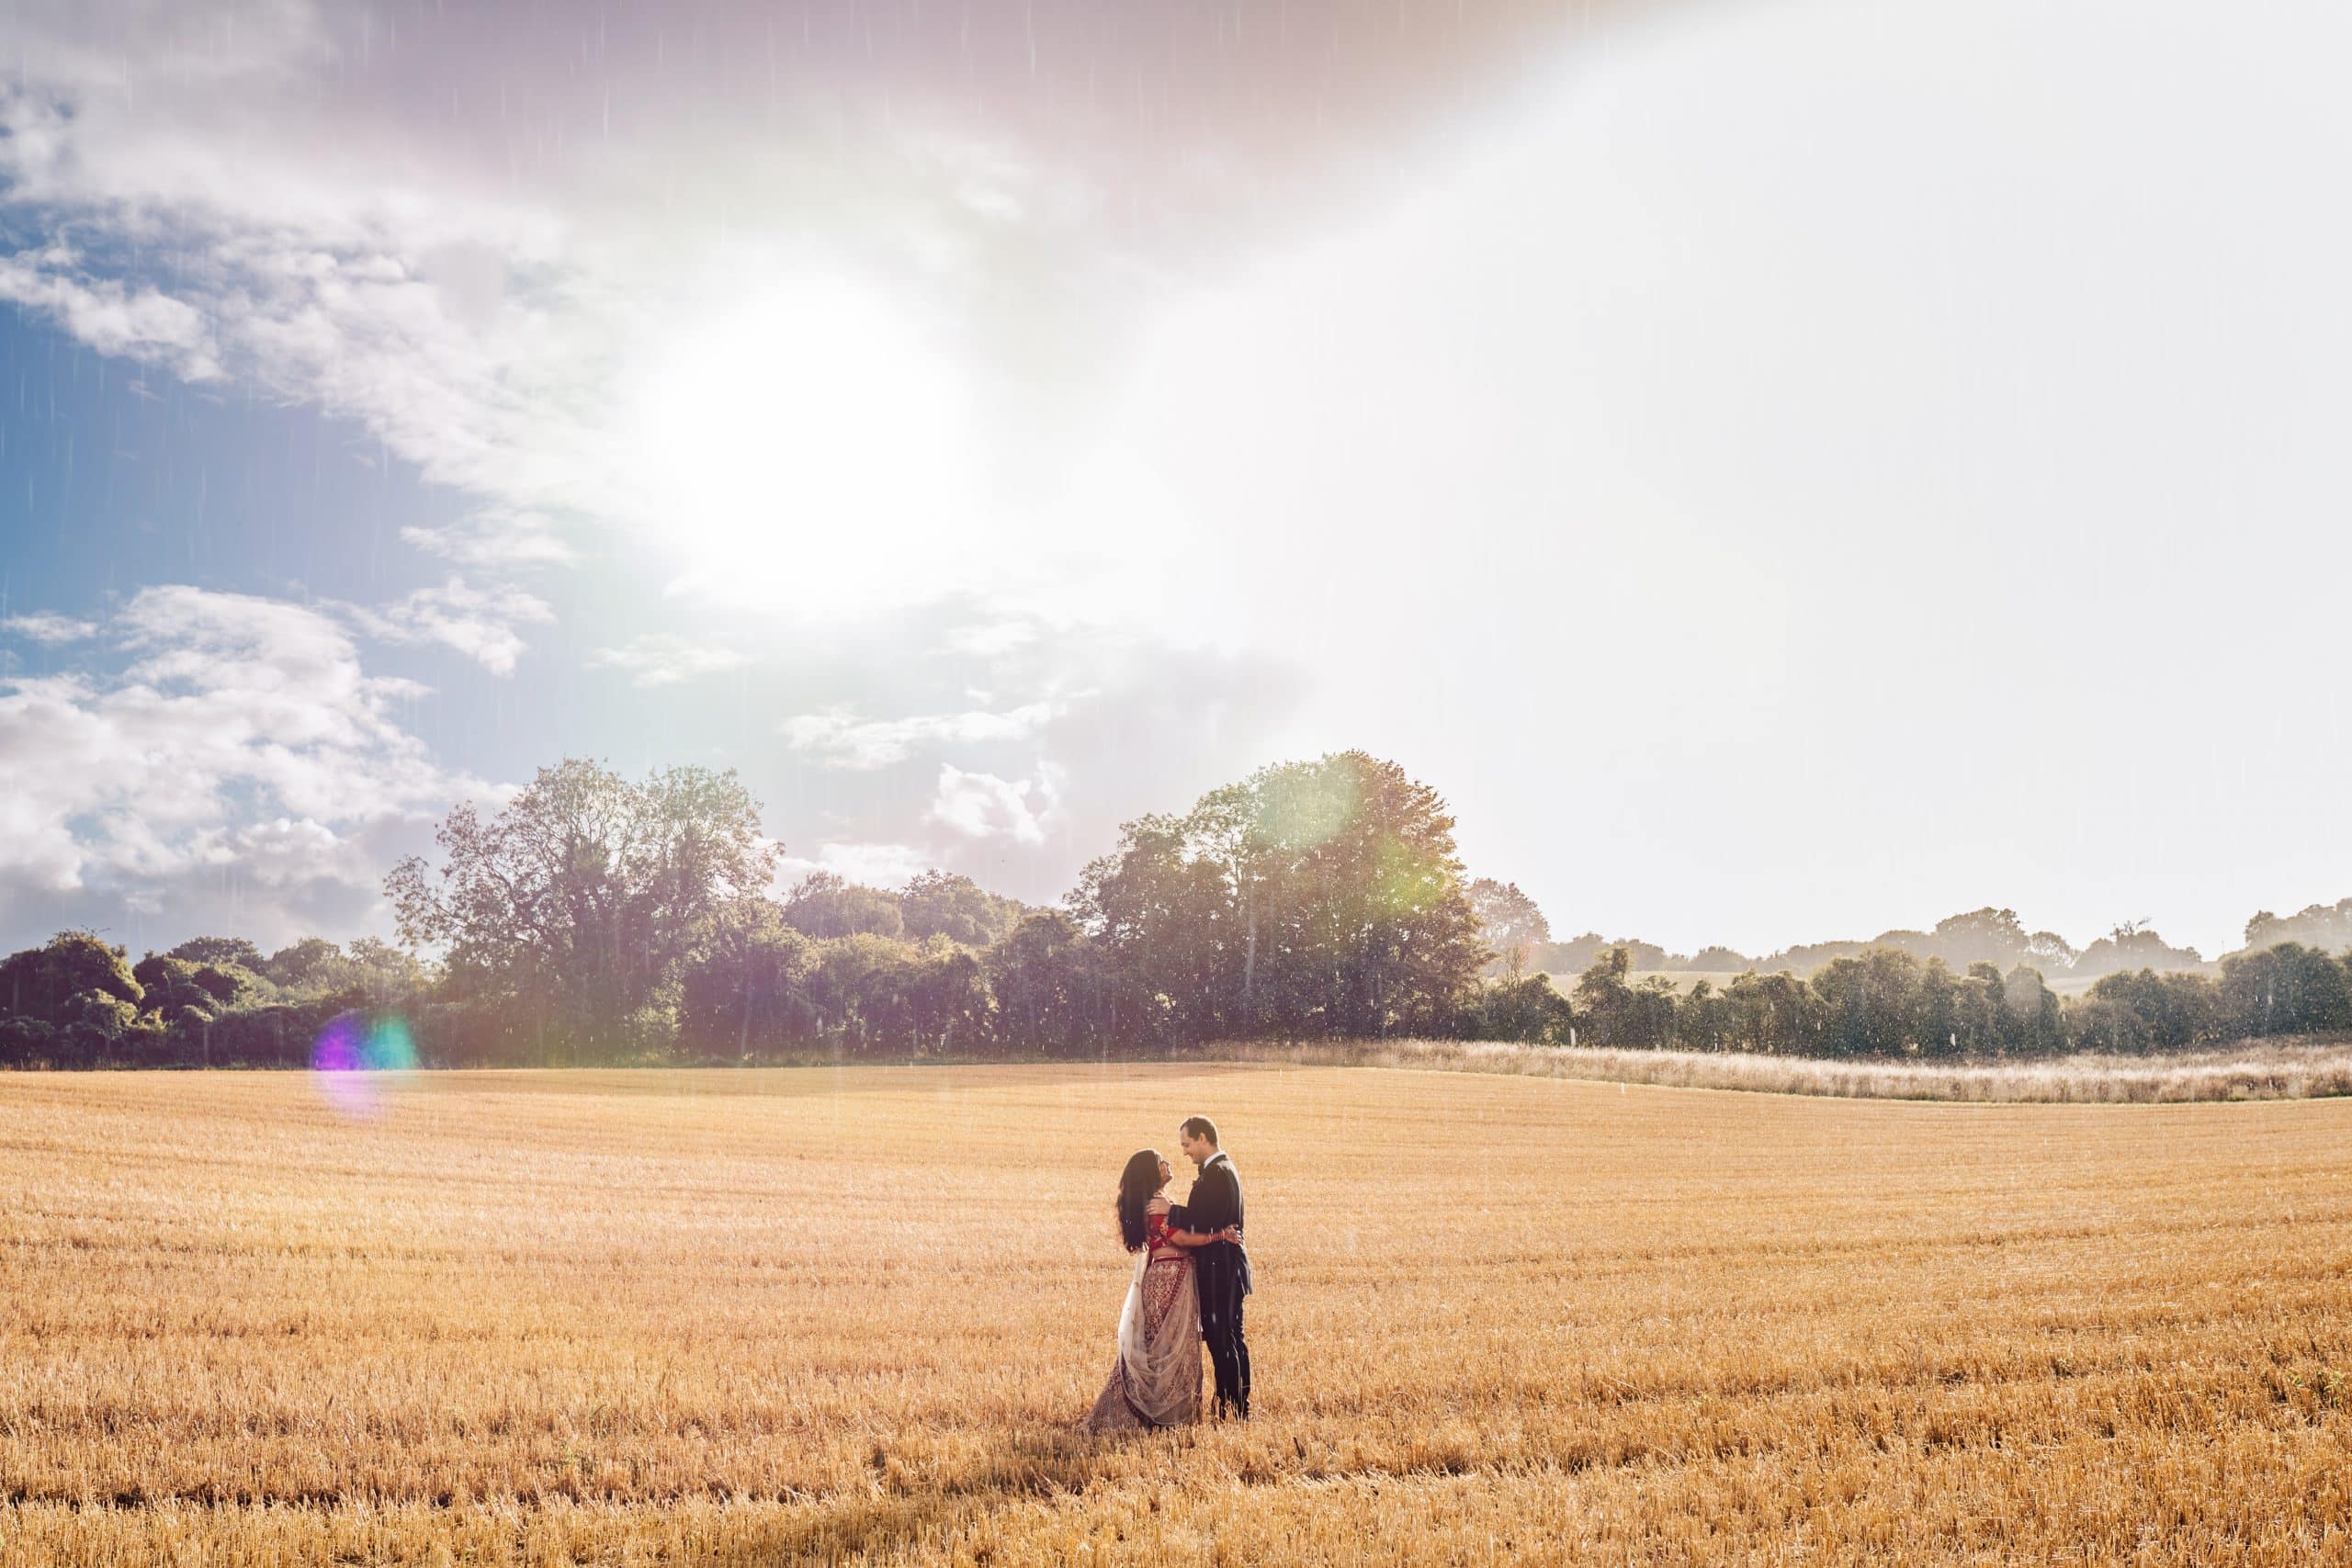 Indian bride at the Barn at Upcote wedding venue stands with her husband in a field of wheat, with the most dramatic scene of sun and rain.